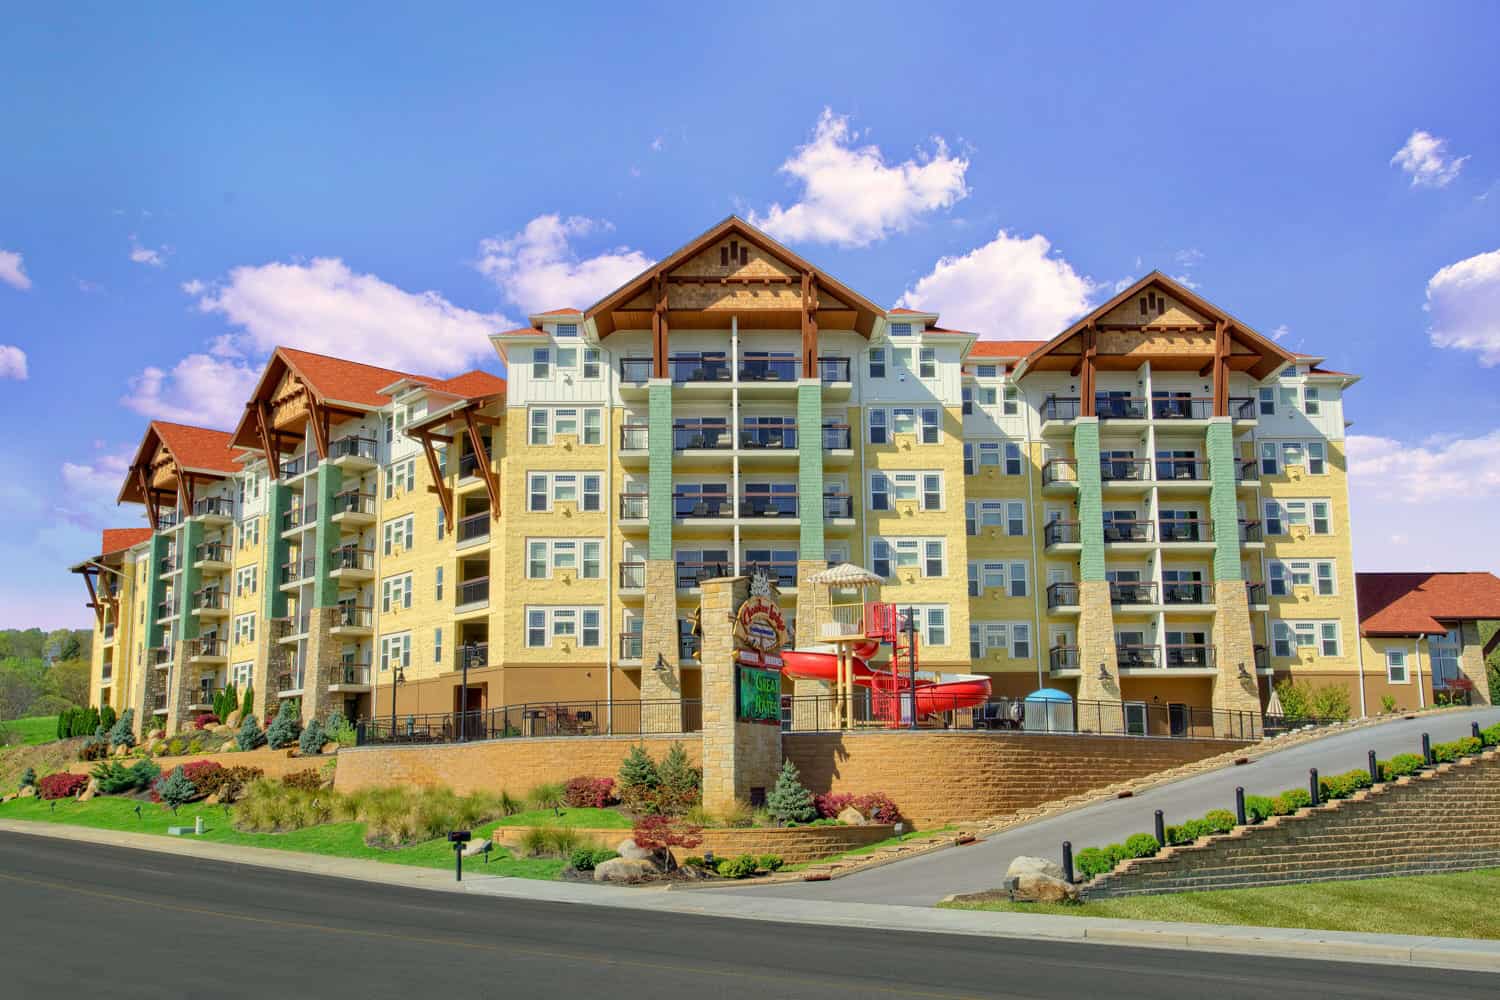 The Cherokee Lodge condos in Pigeon Forge.